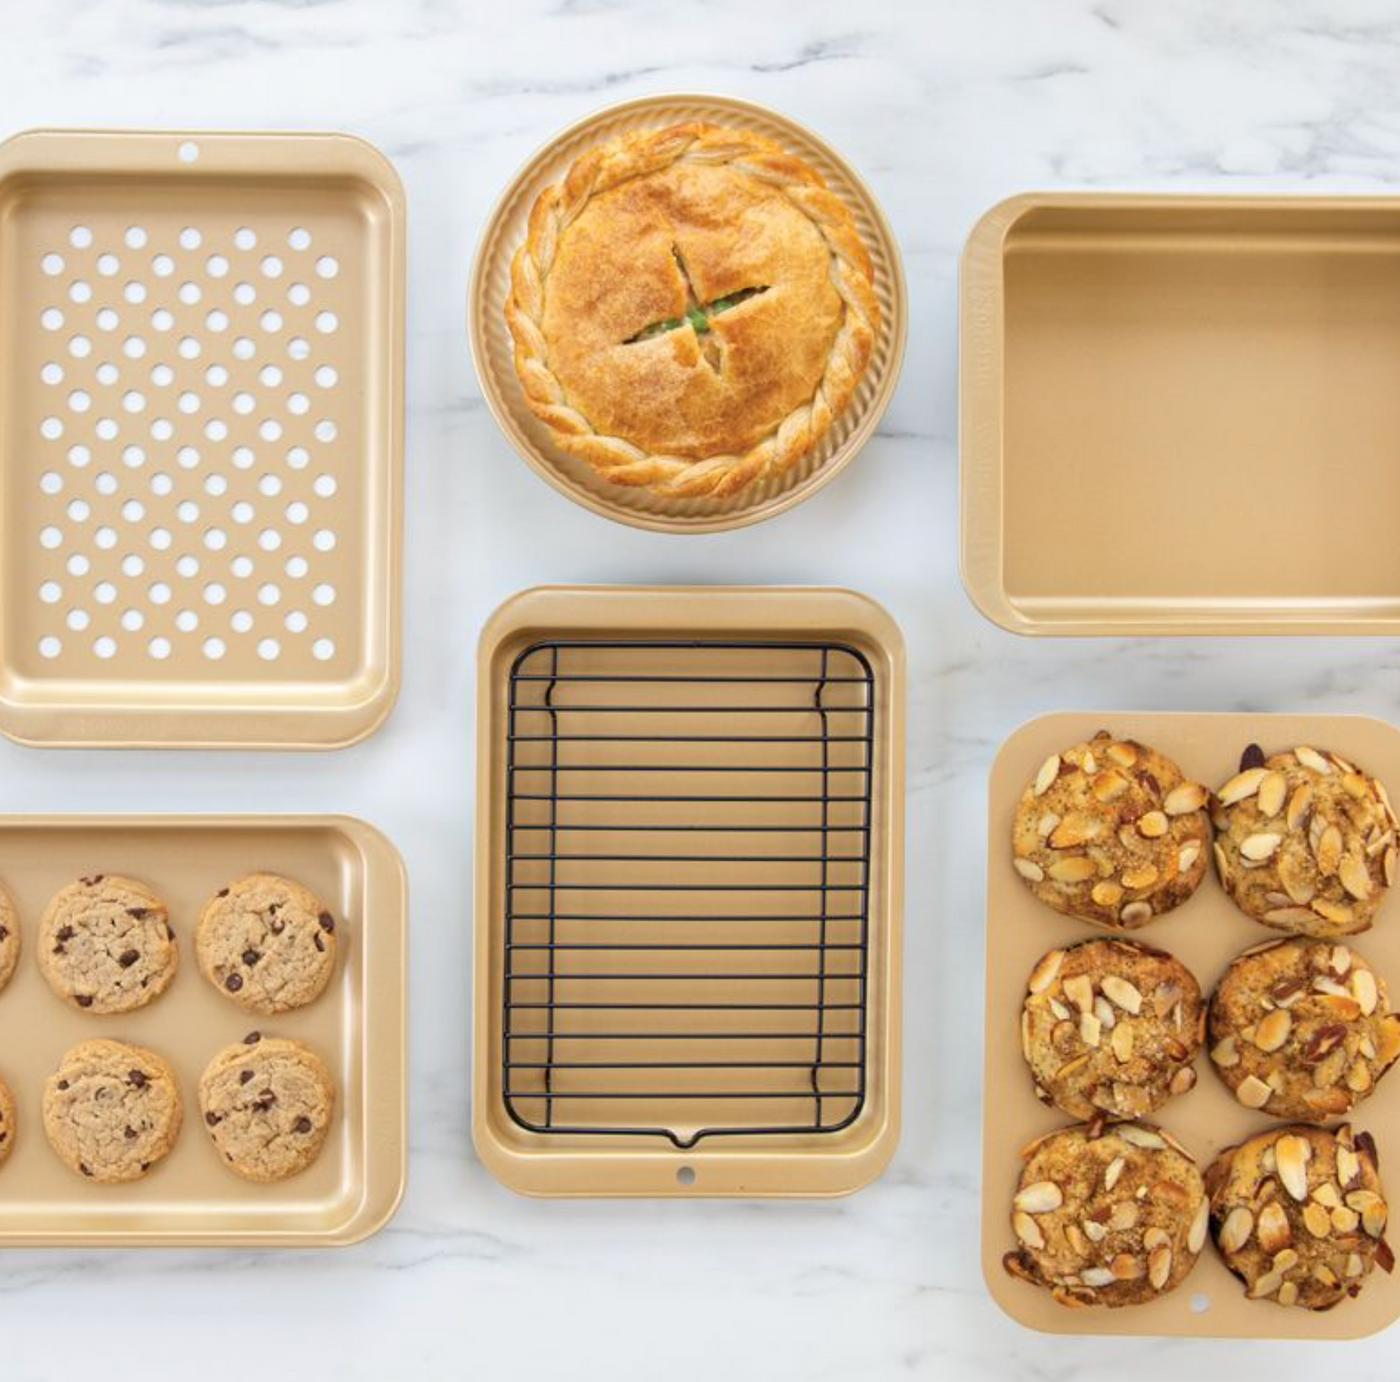 Nordic Ware Covered Pie Pan